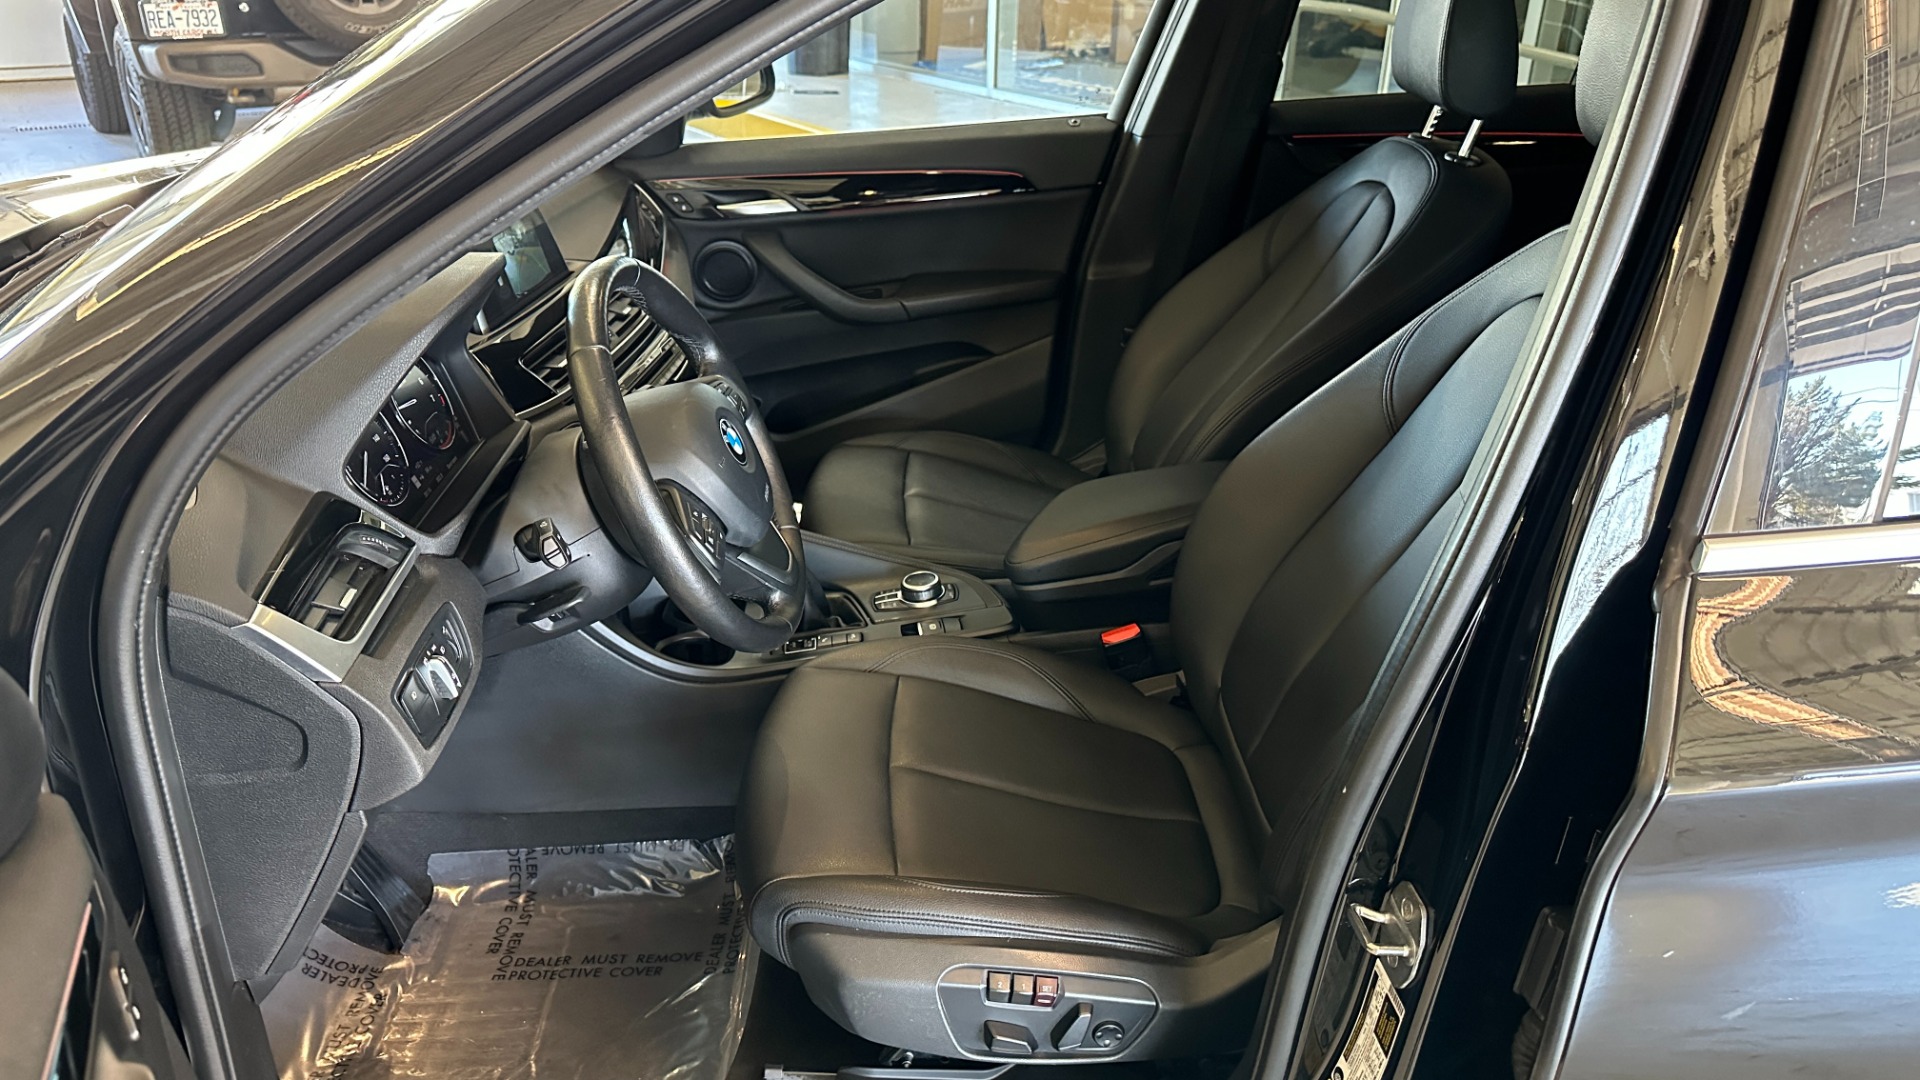 Used 2019 BMW X1 xDrive28i / CONVENIENCE PACKAGE / HEATED STEERING for sale $28,000 at Formula Imports in Charlotte NC 28227 23